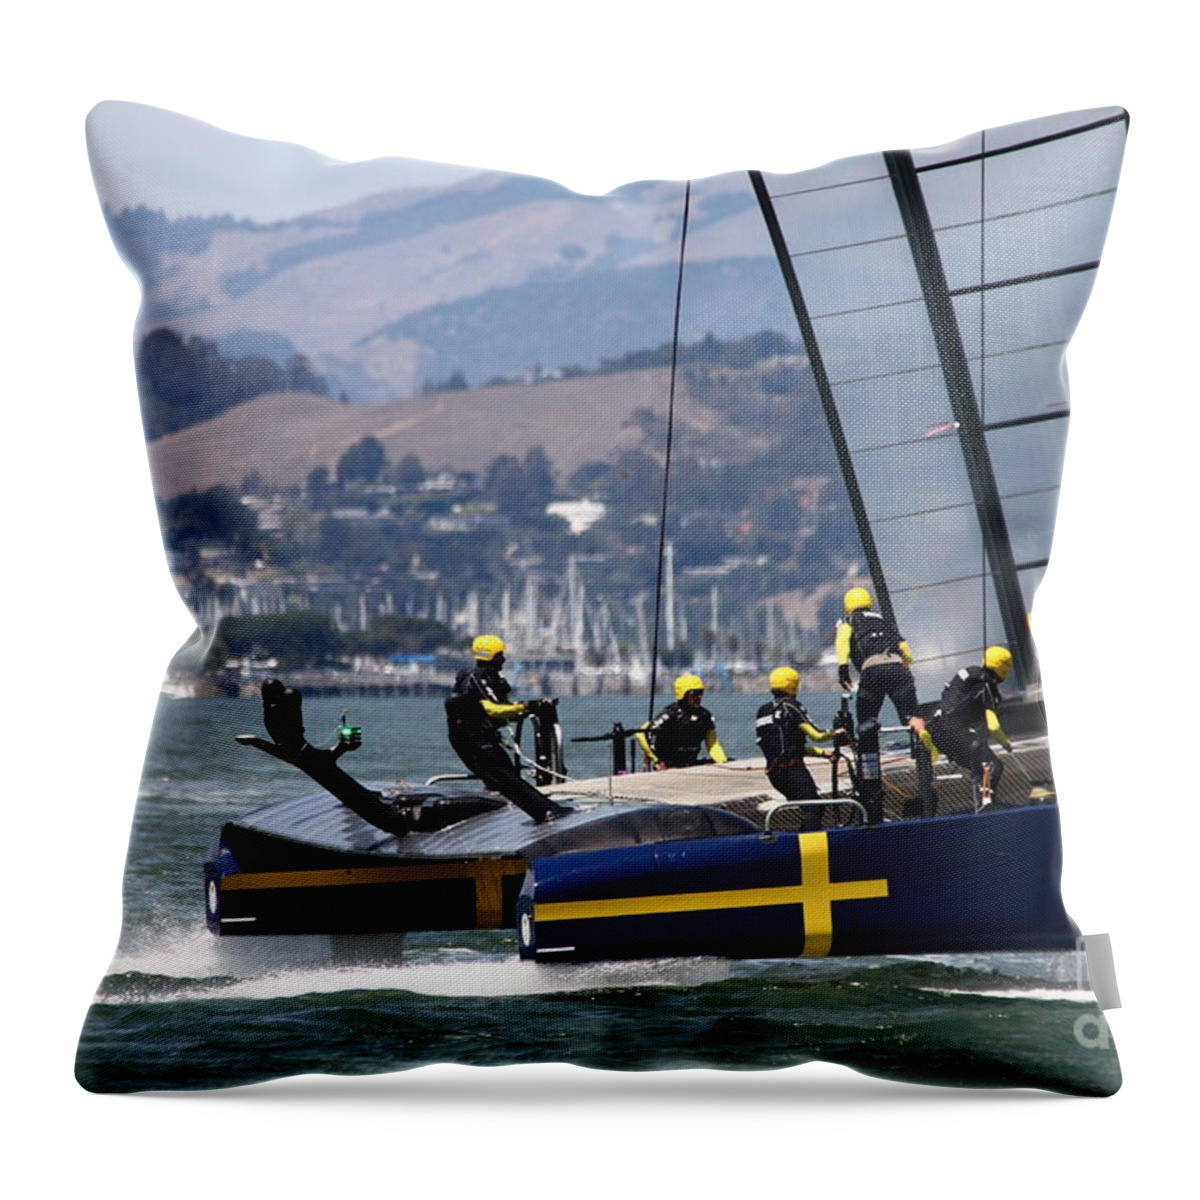 Sports Event Throw Pillow featuring the photograph Zipping Along by Tony Lee